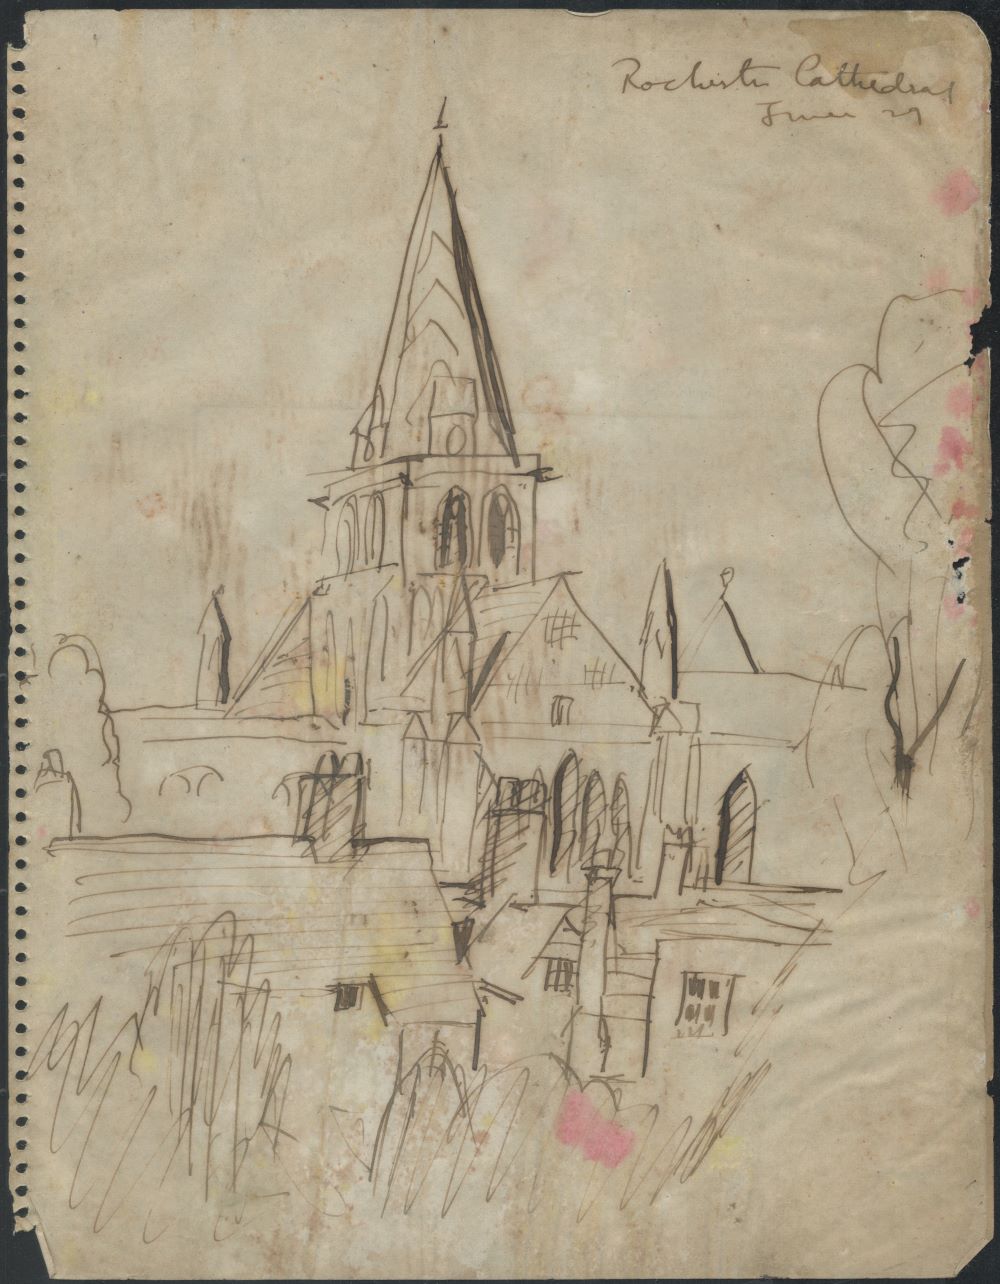 A sketch of a church on old paper